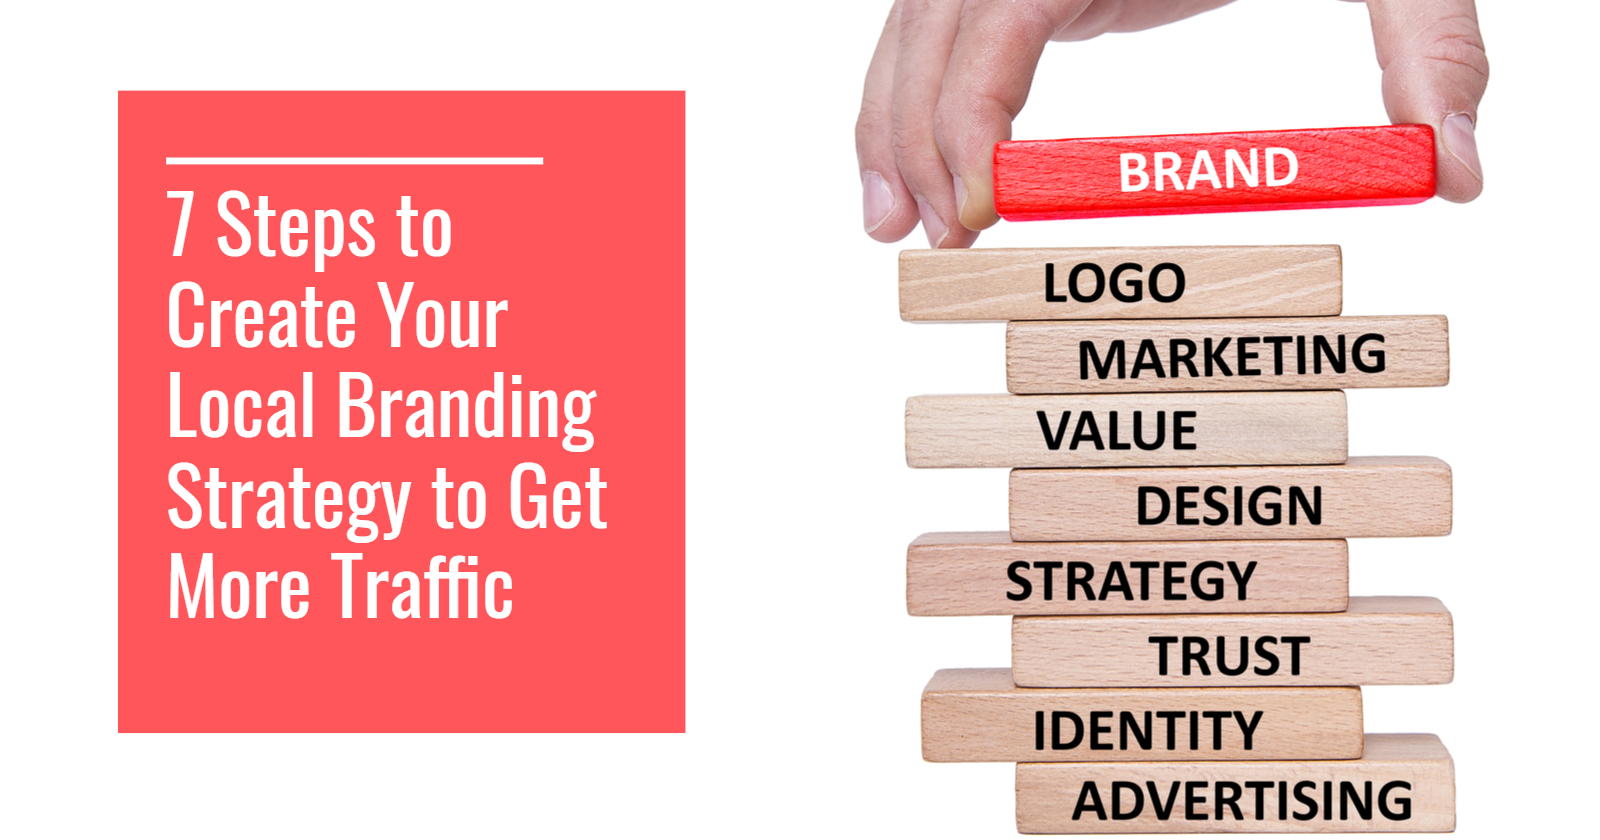 7-Steps-to-Create-Your-Local-Branding-Strategy-to-Get-More-Traffic-Jason-Hennessey.jpg